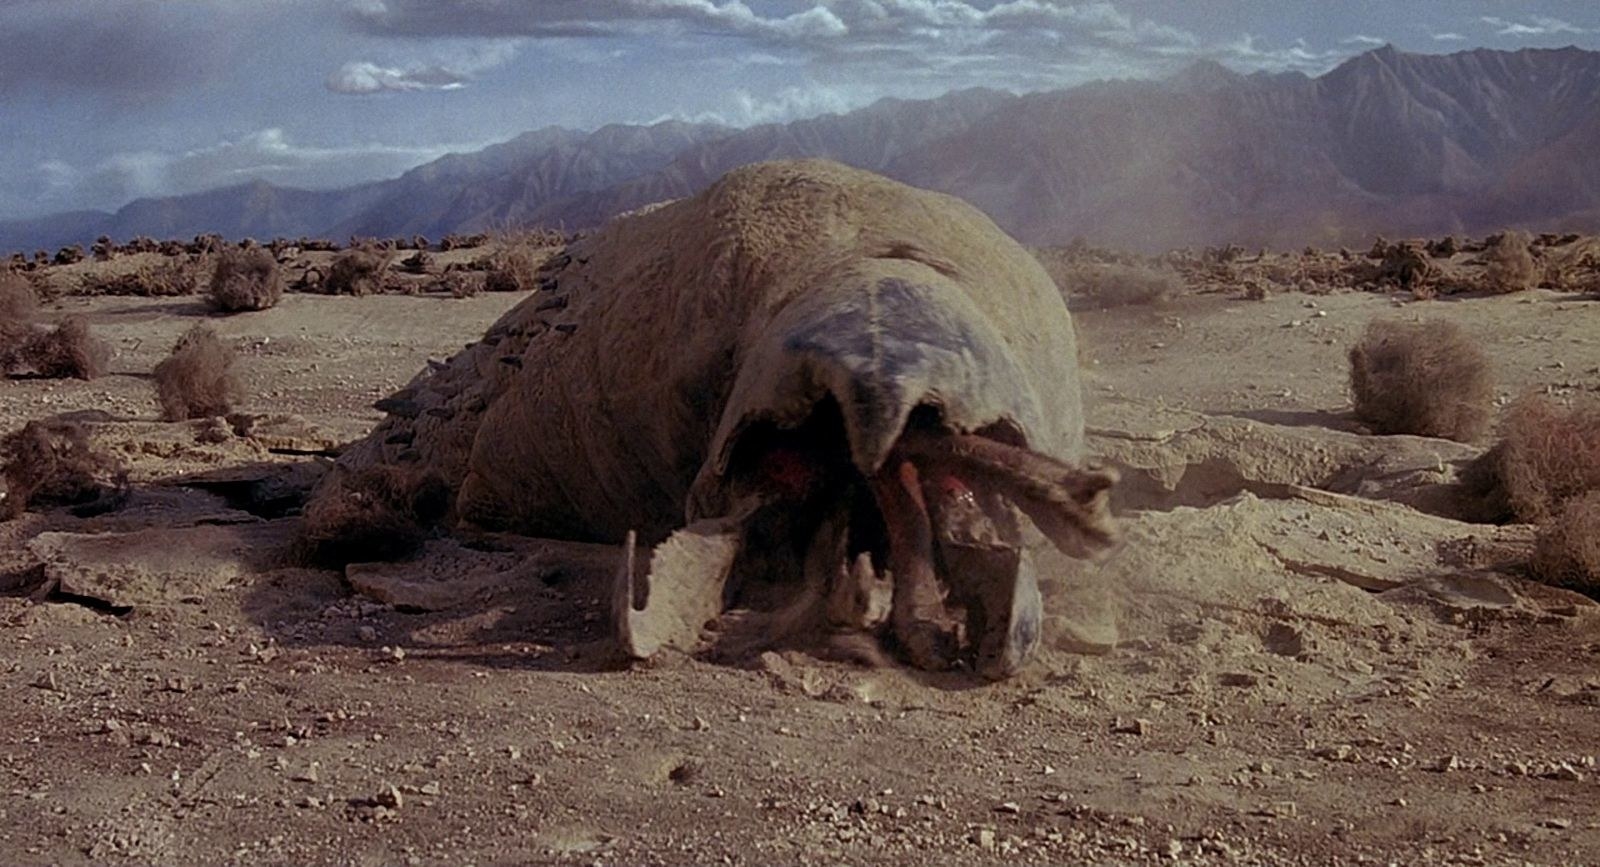 A giant worm emerging from the sand in &quot;Tremors&quot;